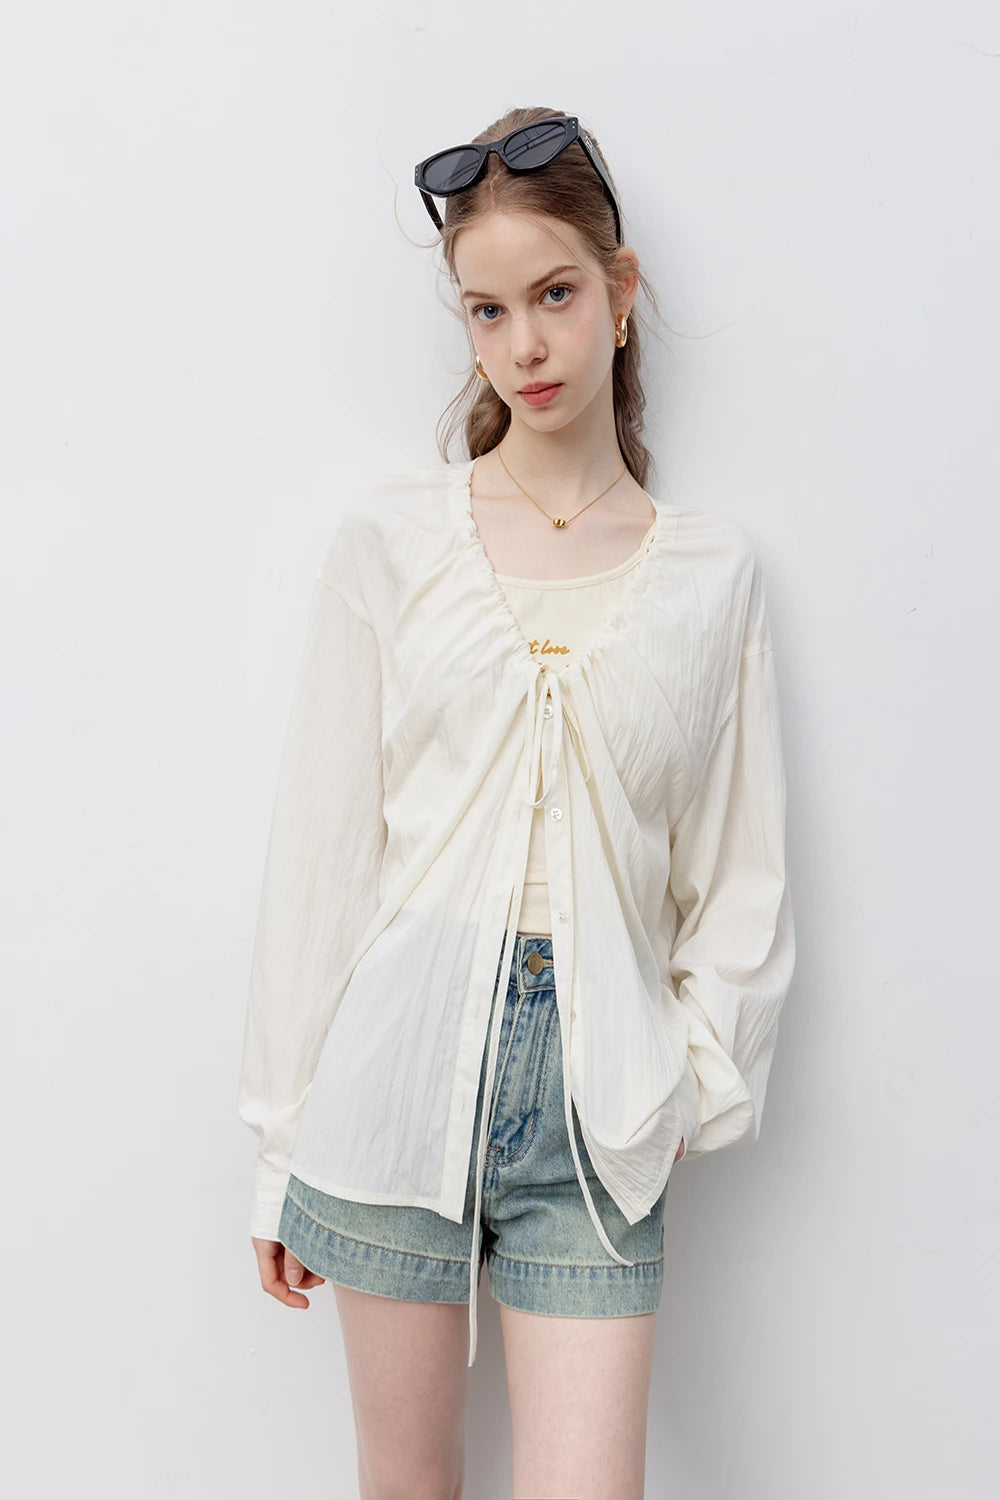 Gathered Neckline Blouse with Button Detail